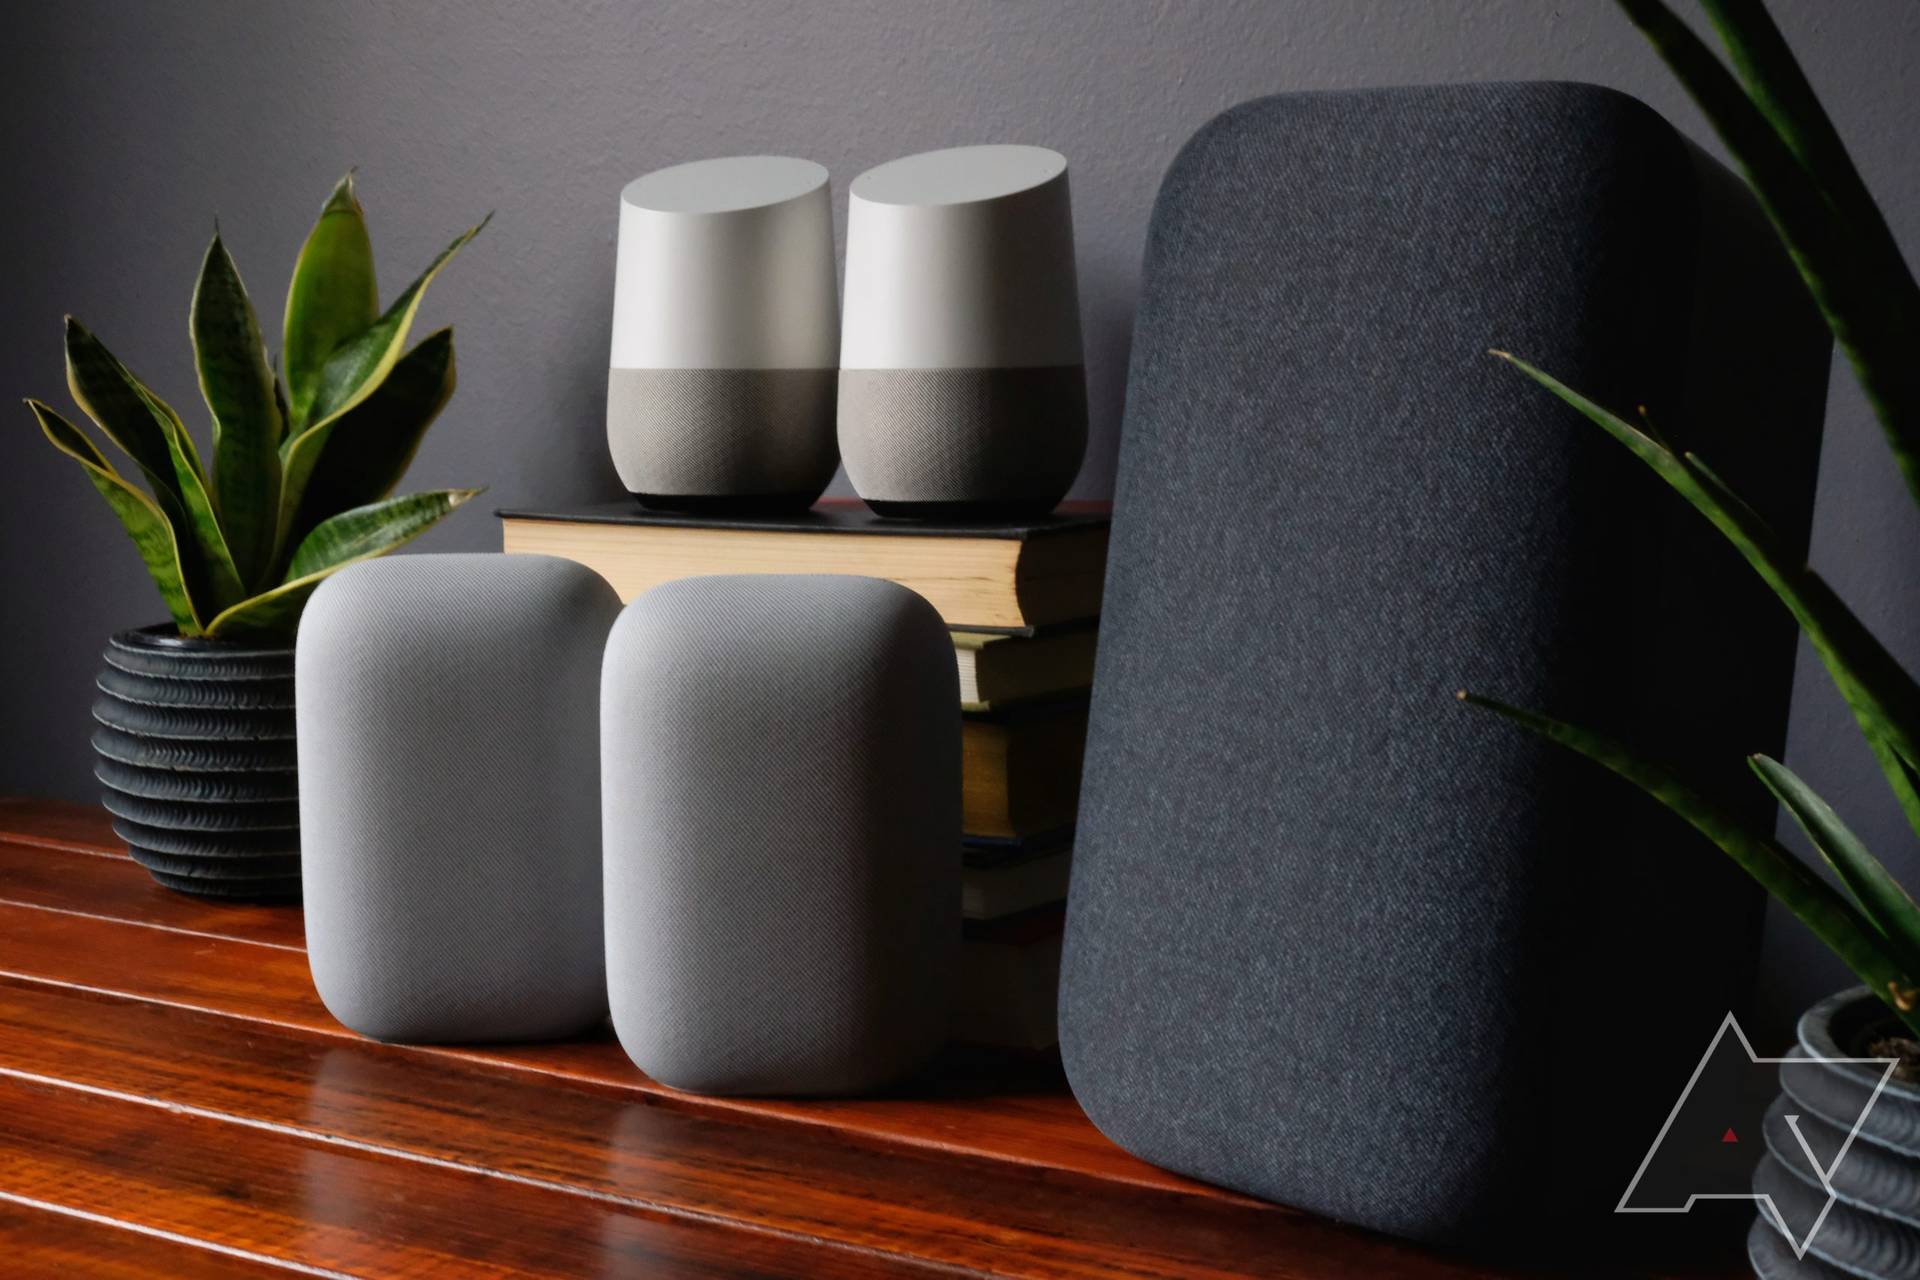 Google Pixel users may not be able to set up older Google Home and Nest devices thanks to Sonos